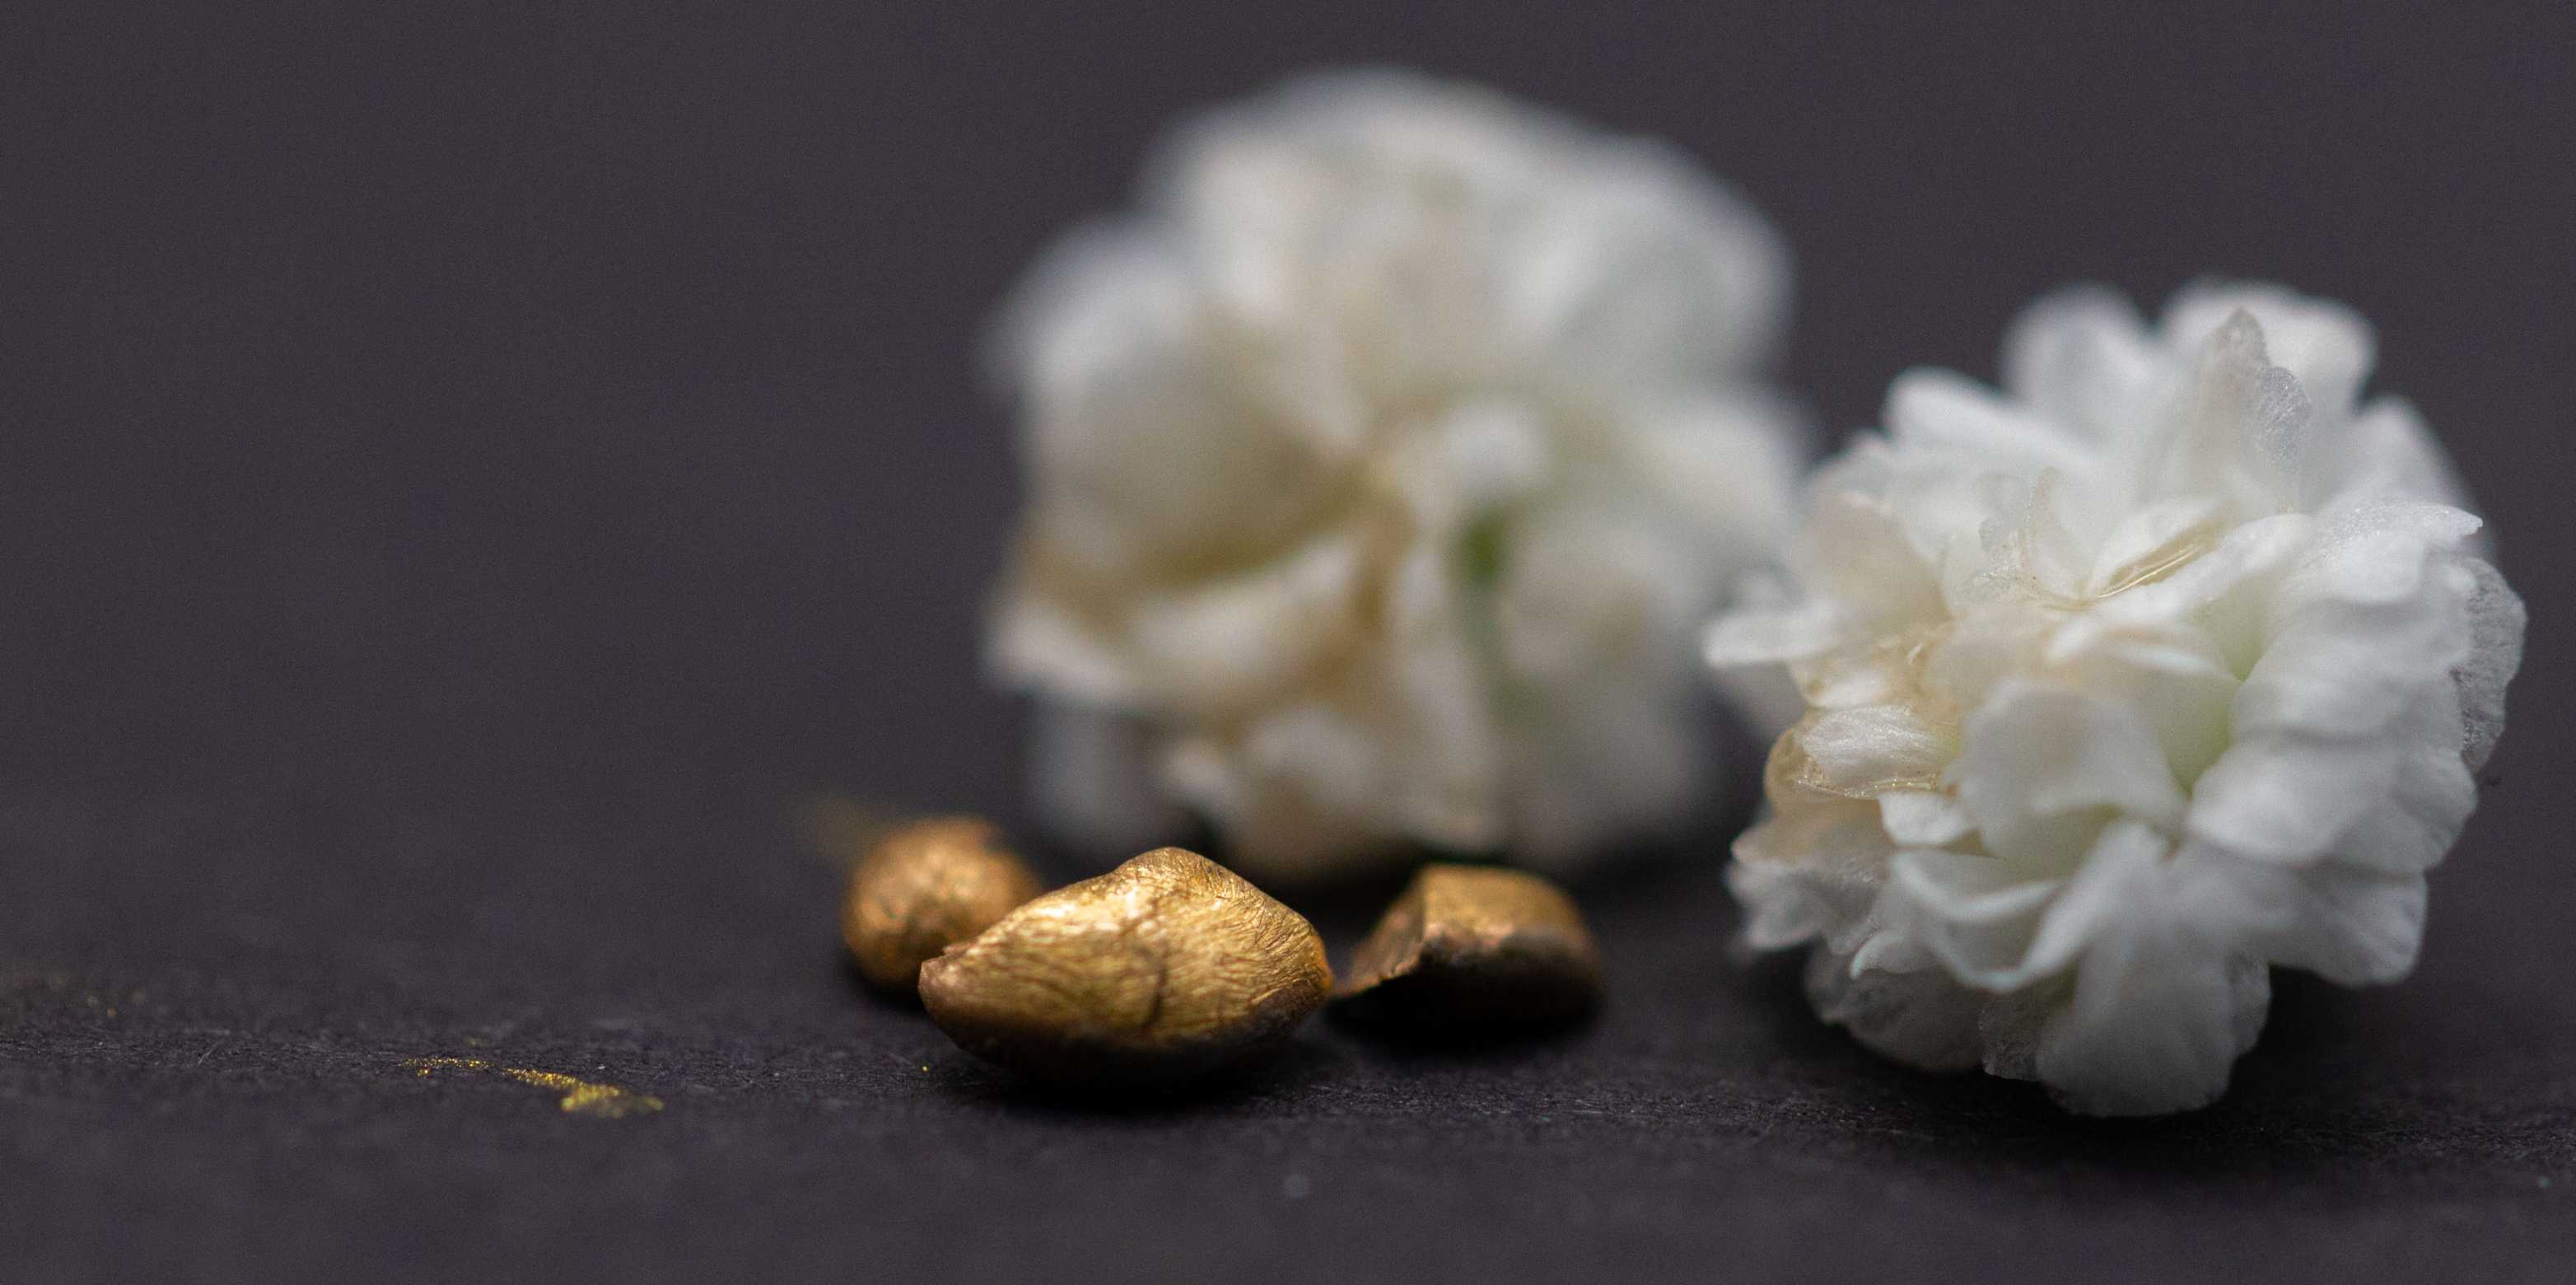 Gold nuggets in front of flowers